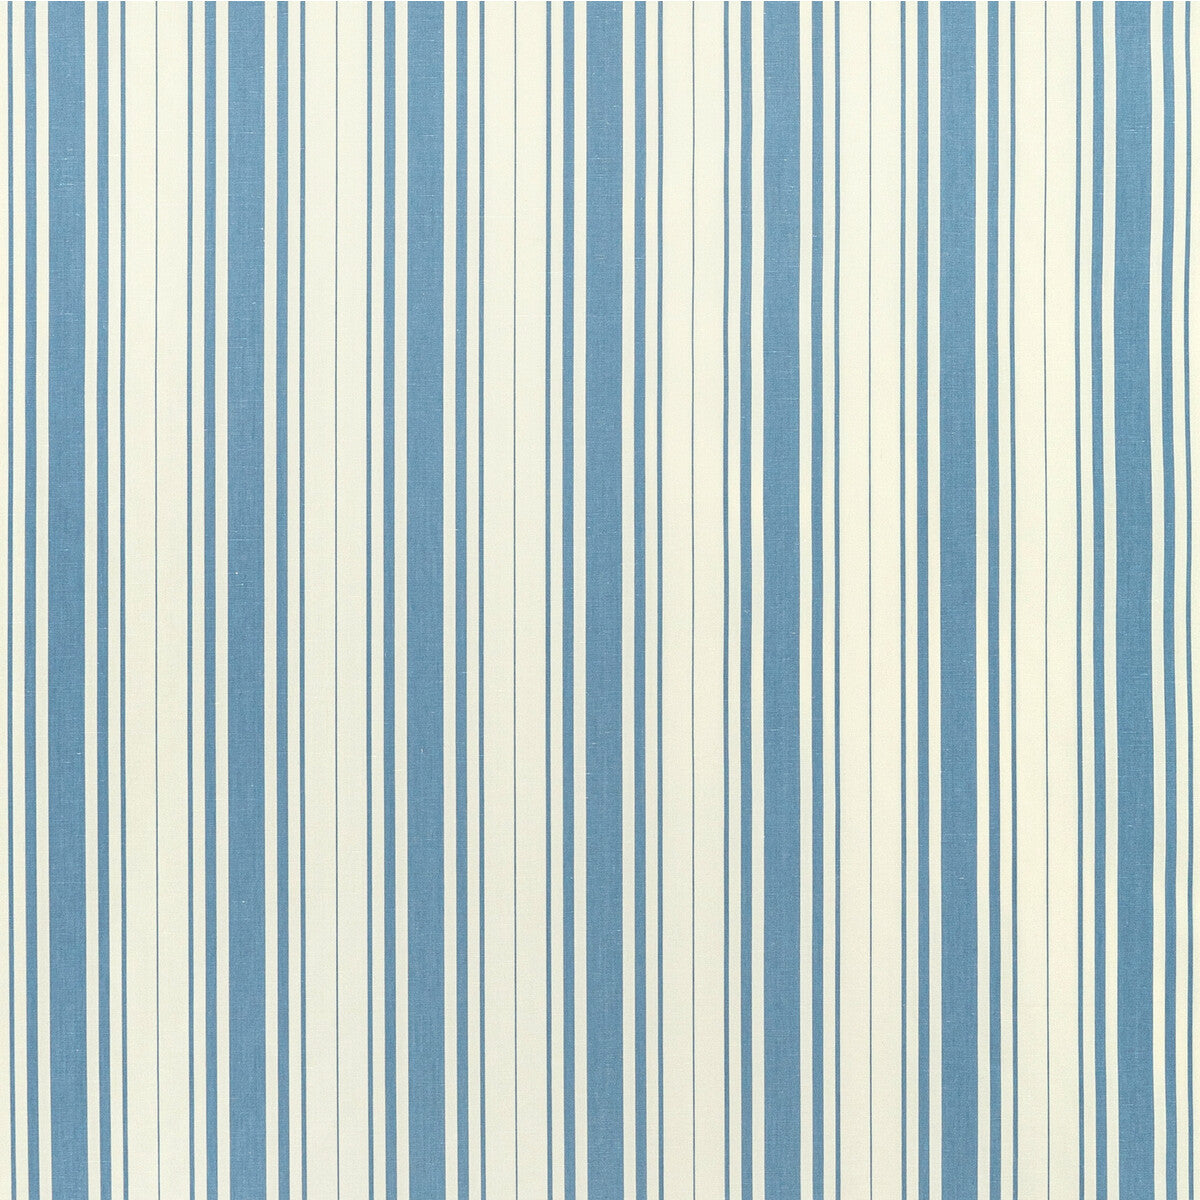 Baldwin Stripe fabric in blue color - pattern 2022100.5.0 - by Lee Jofa in the Sarah Bartholomew collection